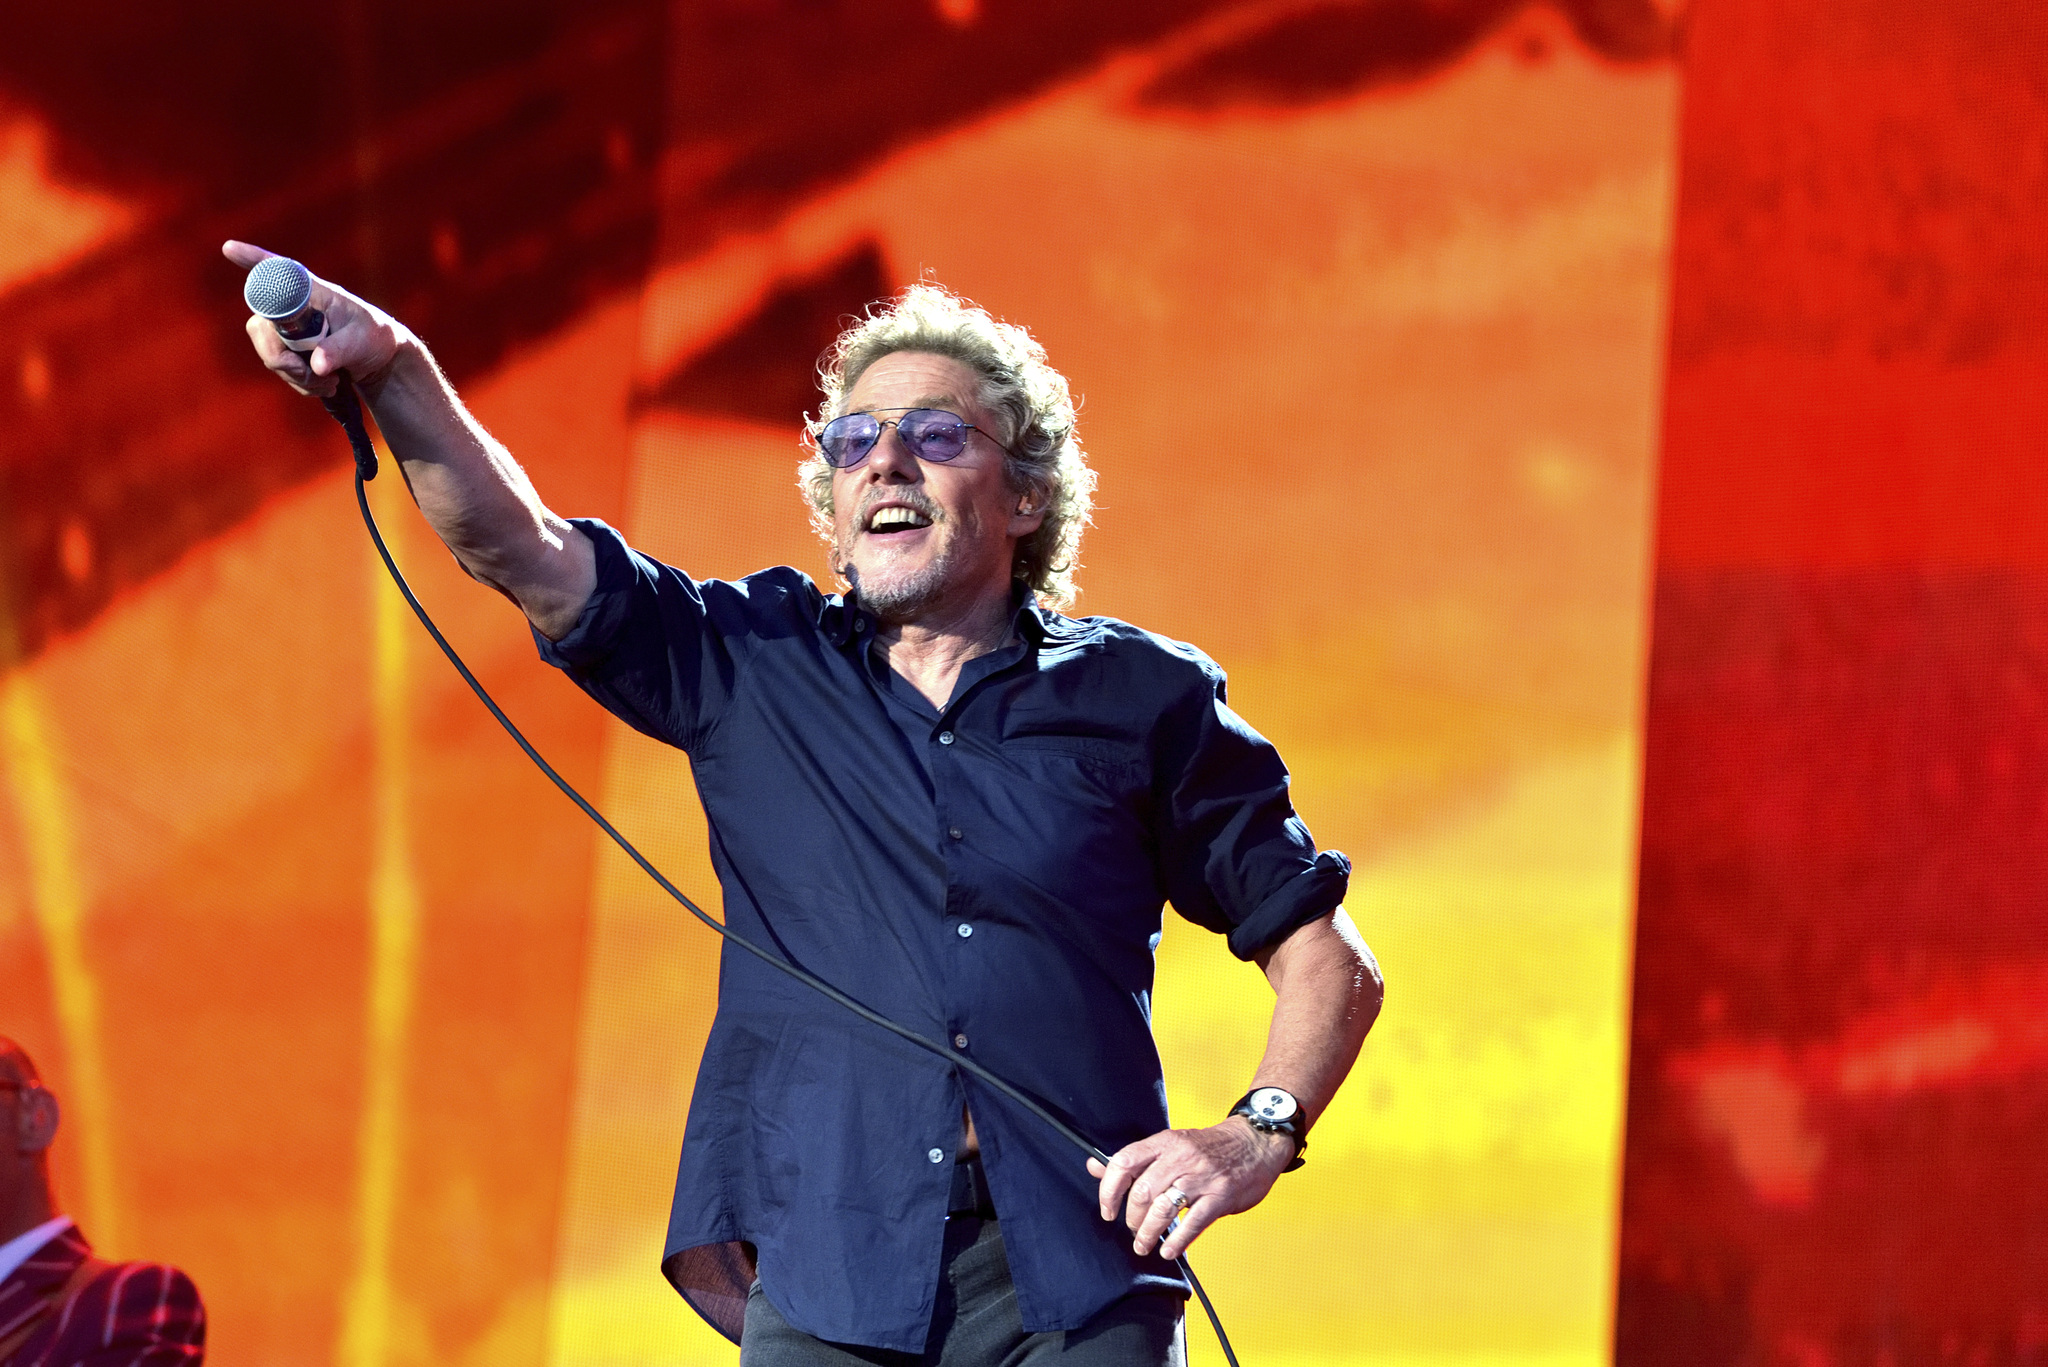 Watch Live Concert Videos from The Who on nugs.net